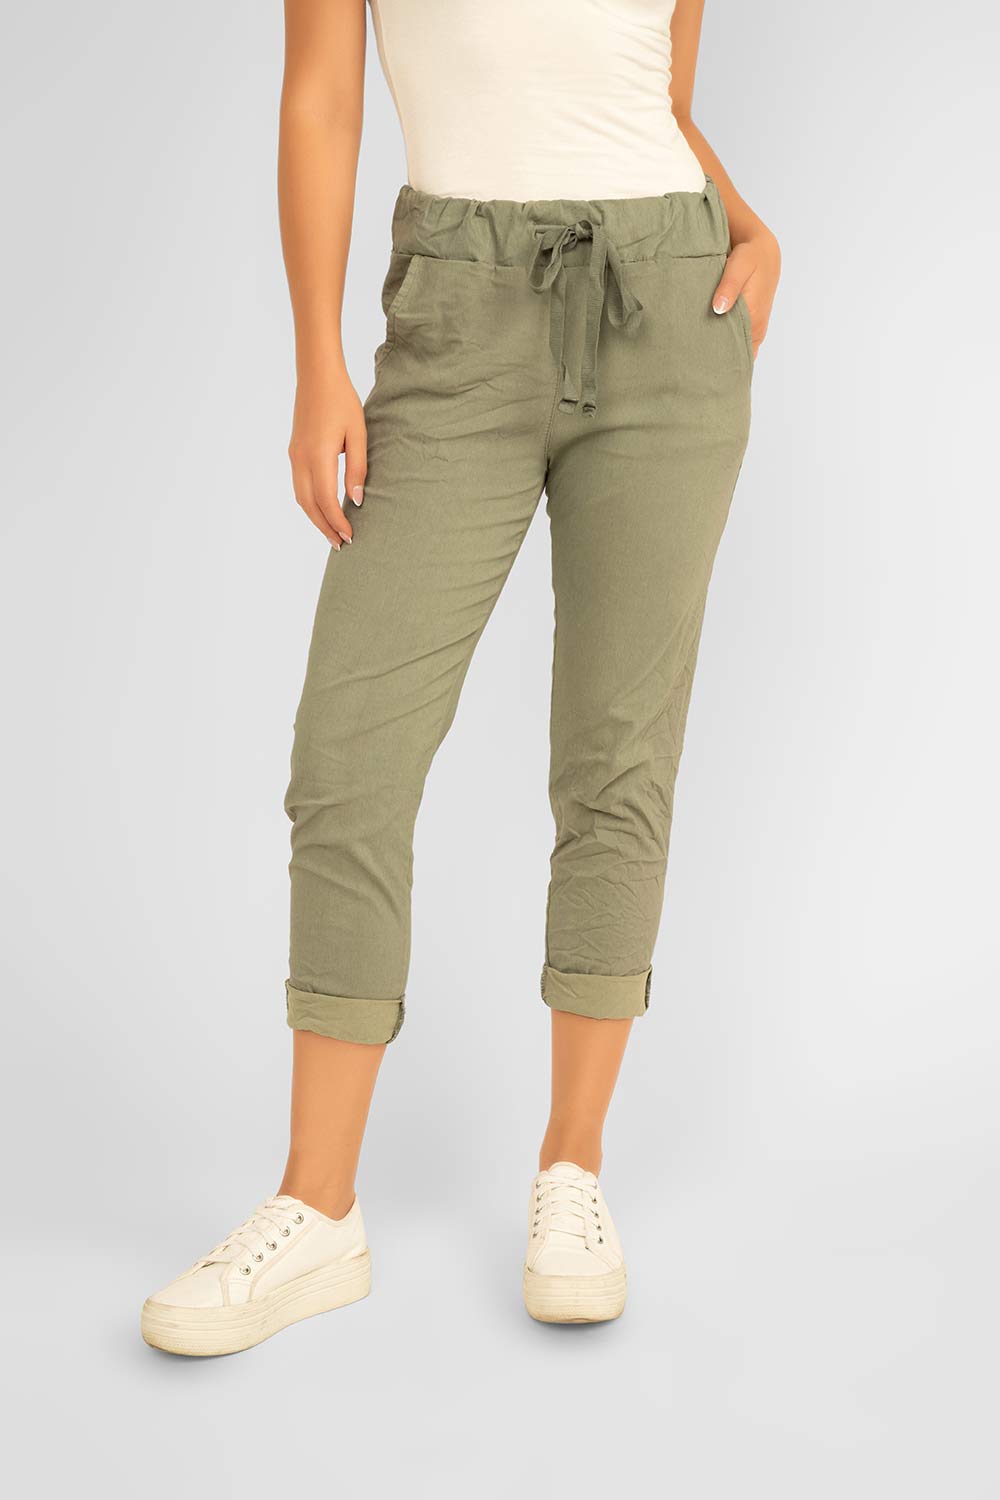 Women's Clothing BELLA AMORE (20002S) Pull-on Pants in ARMY